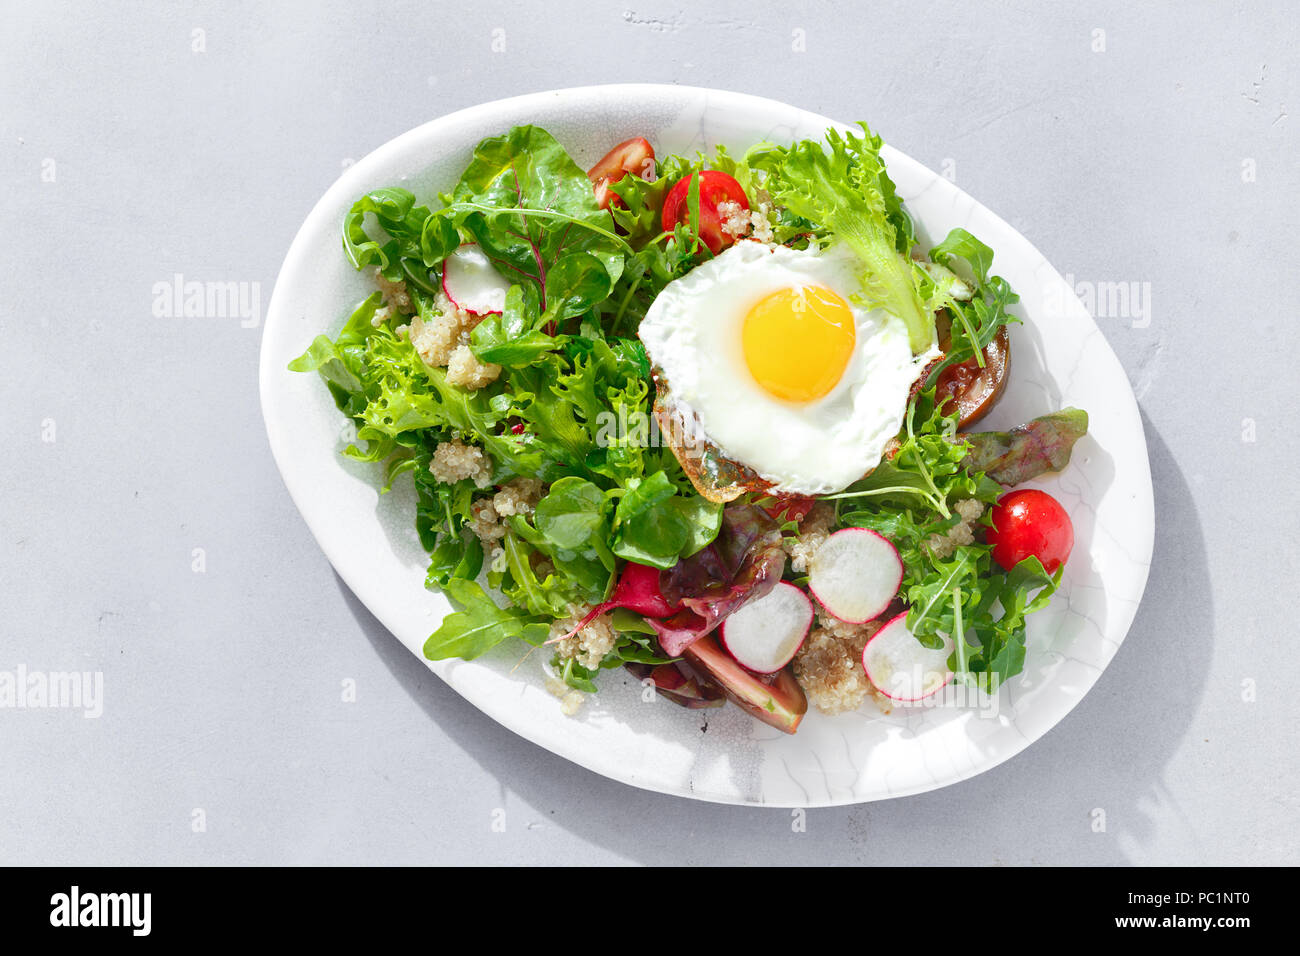 Plate fresh salad with quinoa and fried egg on gray concrete background. Healthy food clean eating Stock Photo